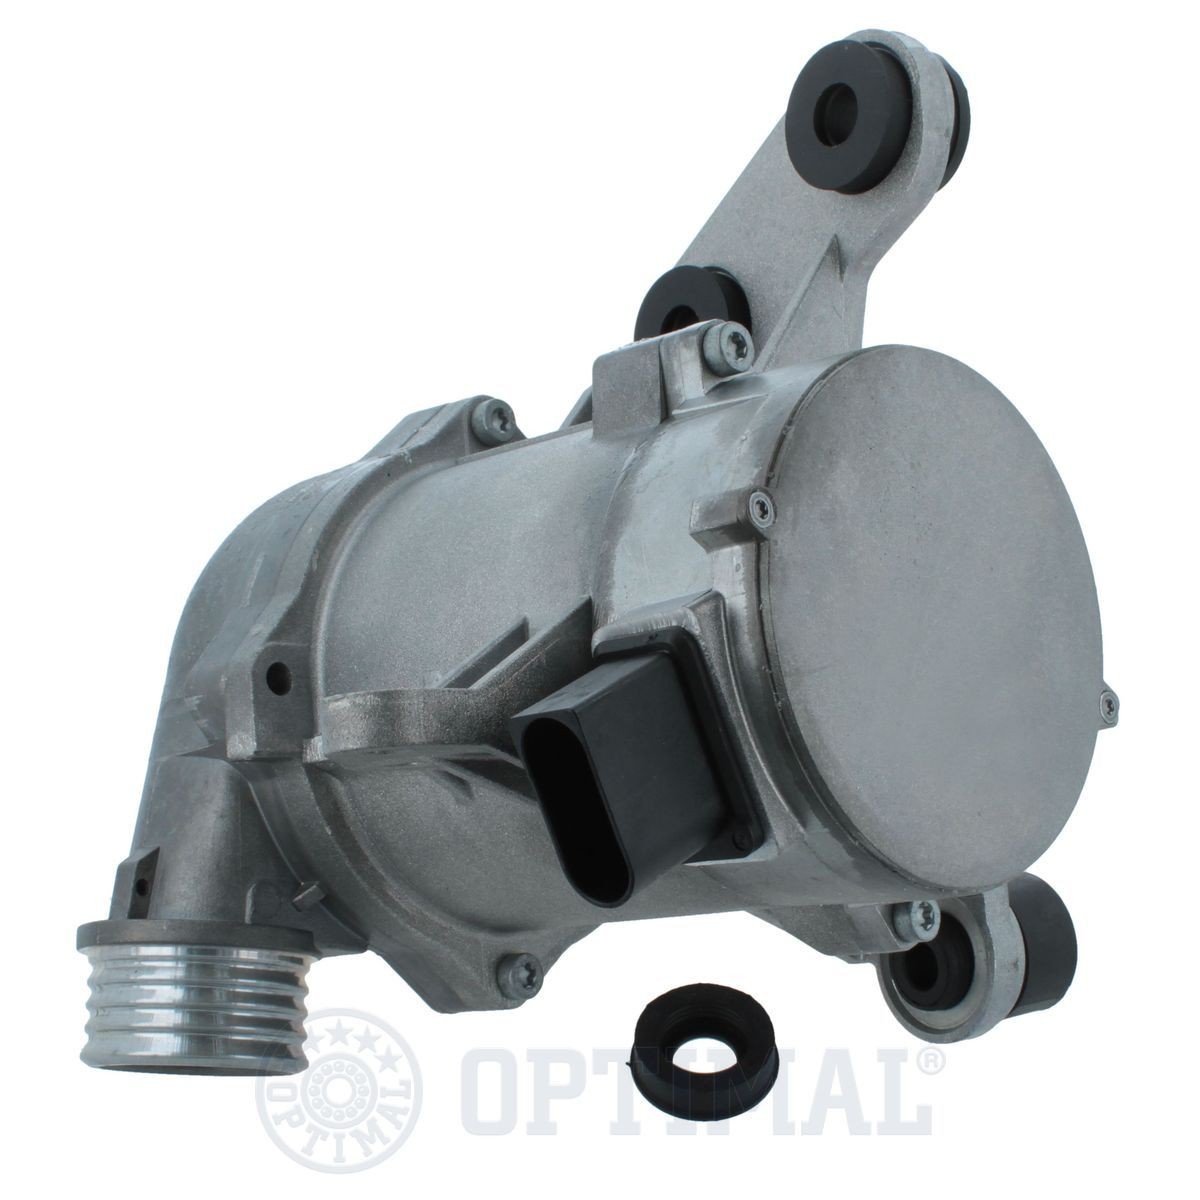 OPTIMAL Water pump for engine AQ-2486 for BMW 5 Series, 1 Series, 3 Series